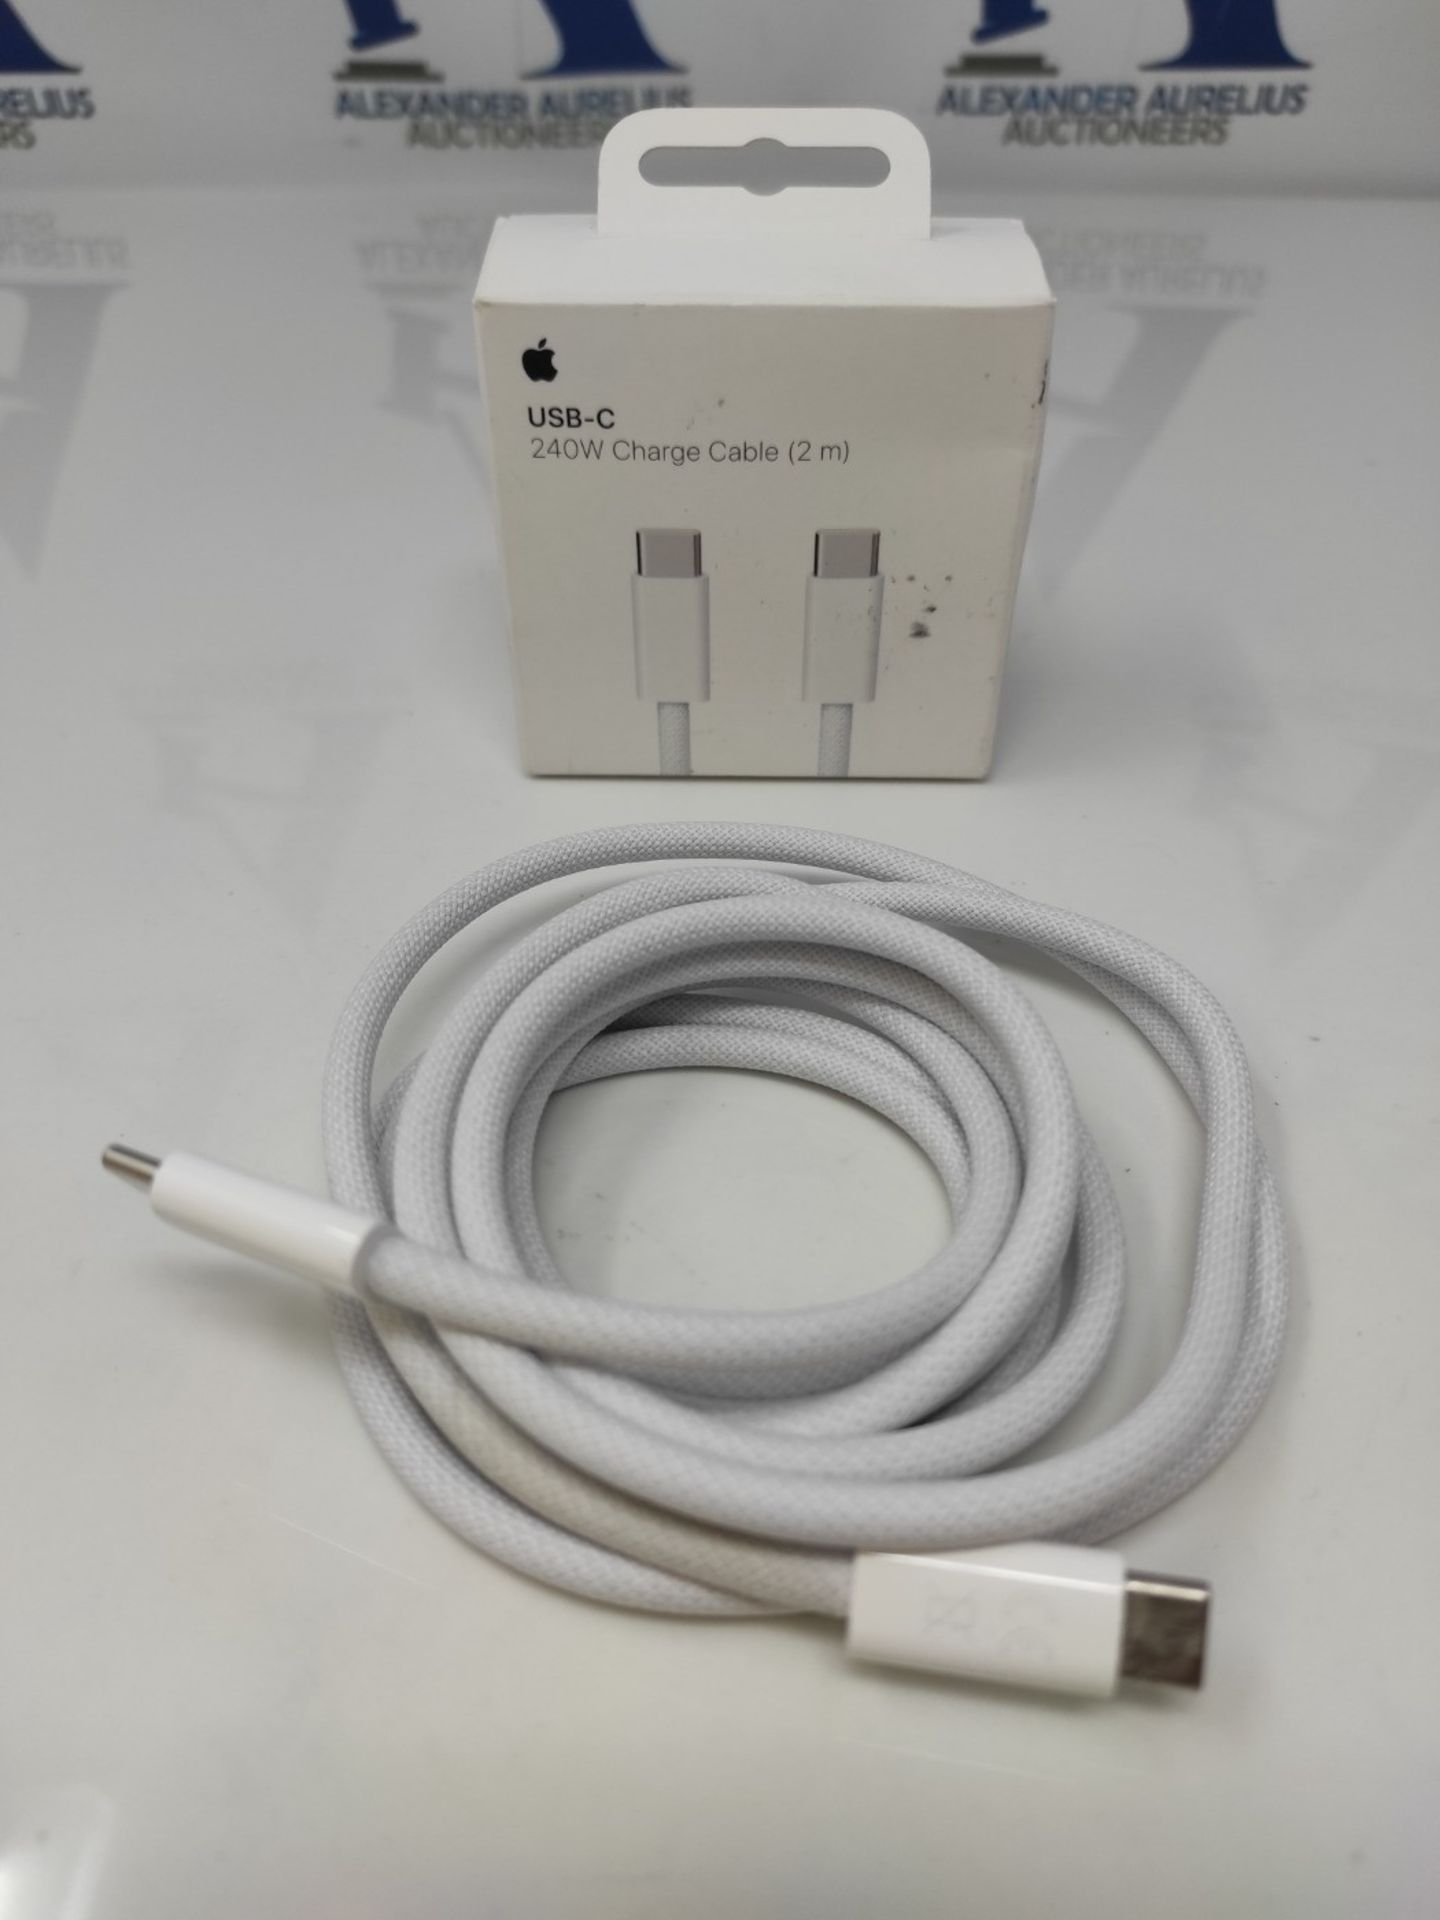 Apple 240W USB-C Charge Cable (2m) - Image 2 of 2